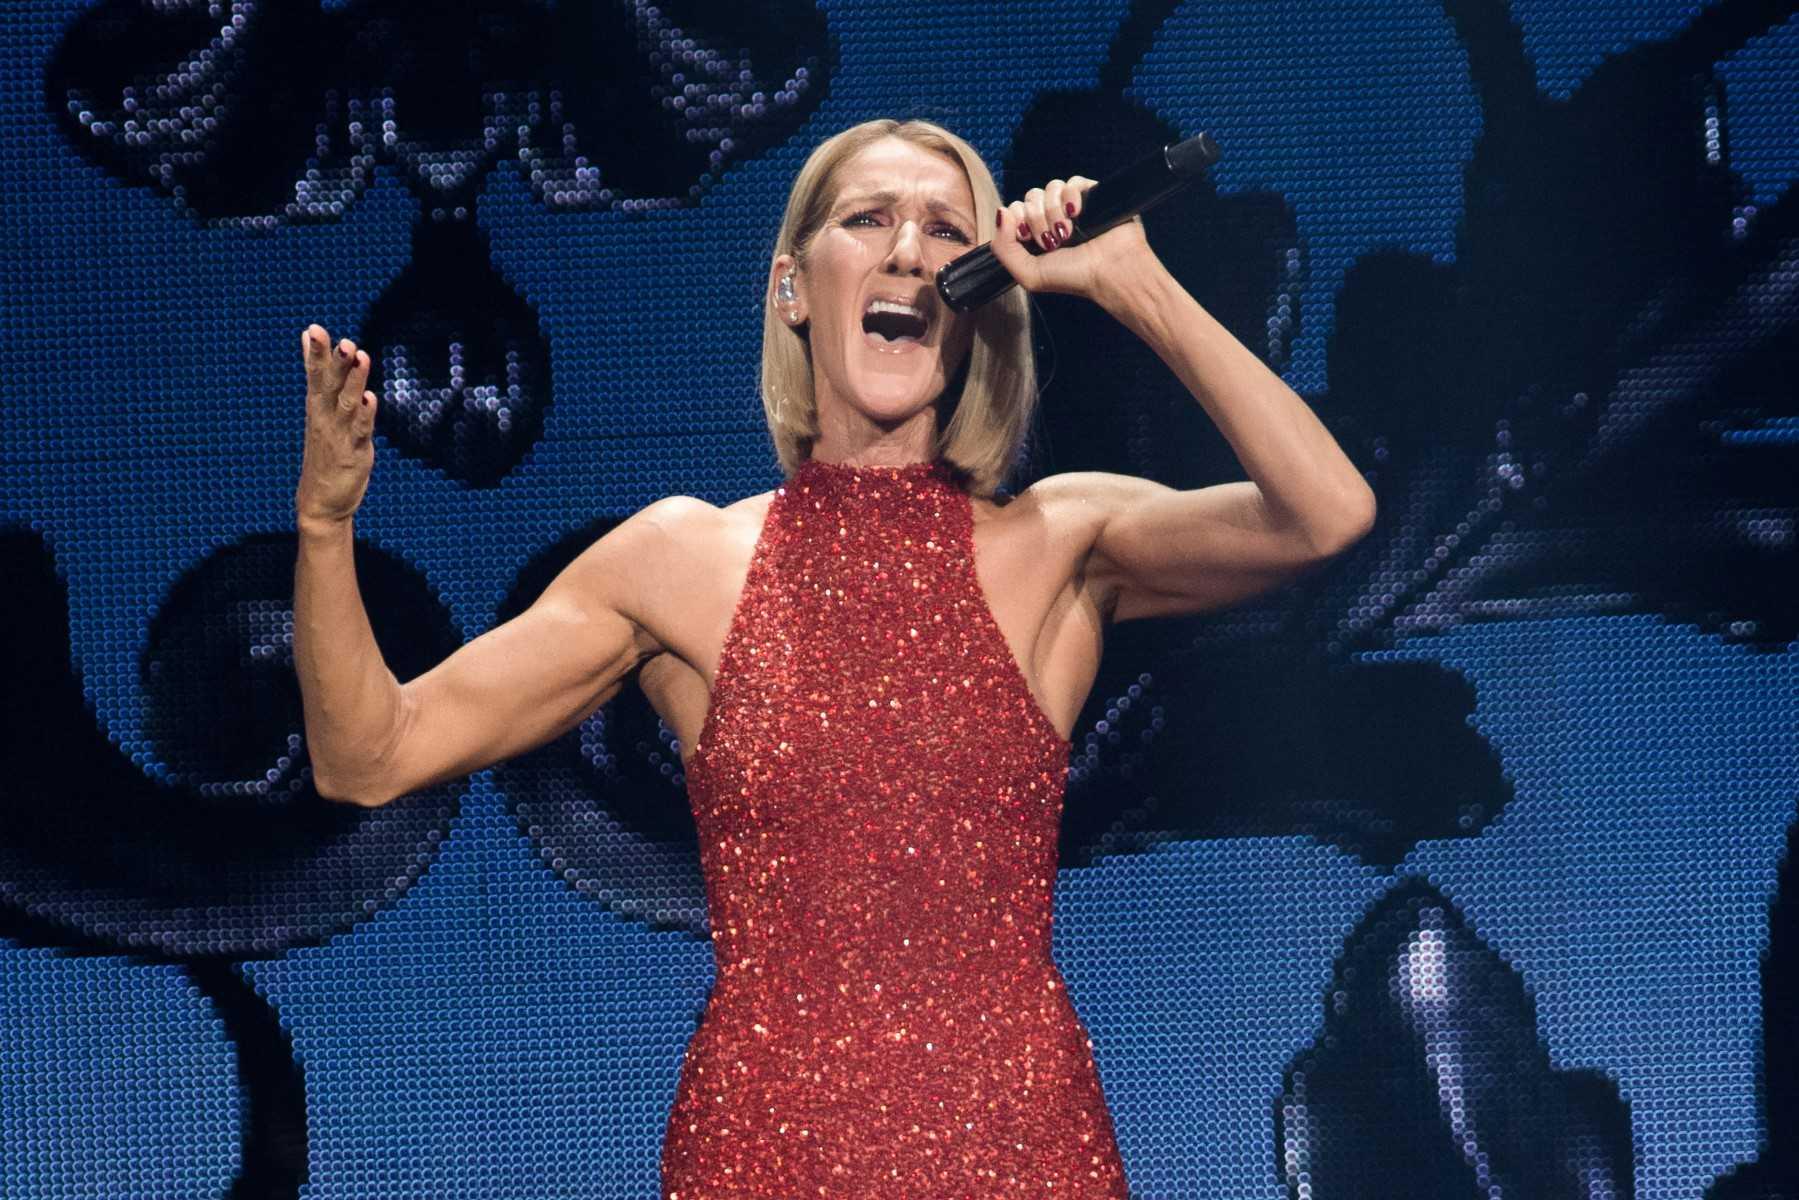 Canadian singer Celine Dion performs on the opening night of her new world tour 'Courage' at the Videotron Centre in Quebec City, Quebec, on Sept 18, 2019. Photo: AFP